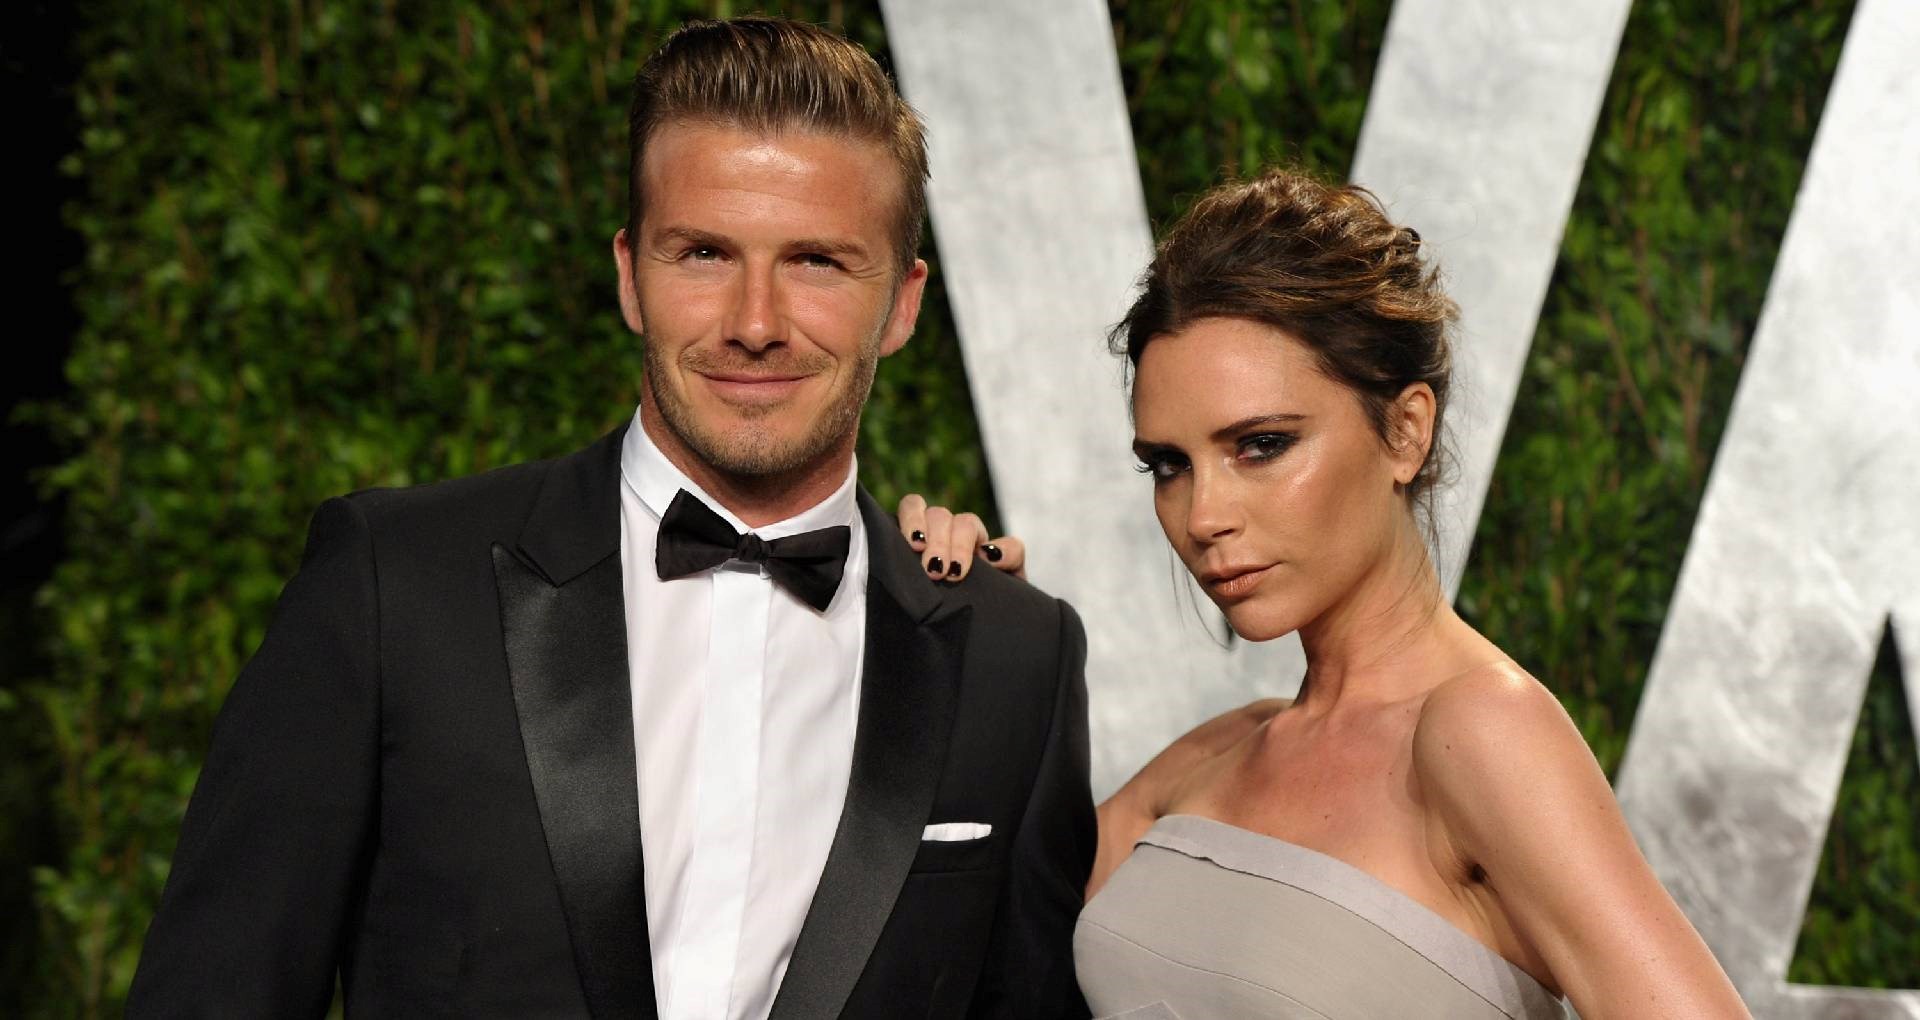 Who Is Rebecca Loos? The Woman David Beckham Allegedly Had An Affair With